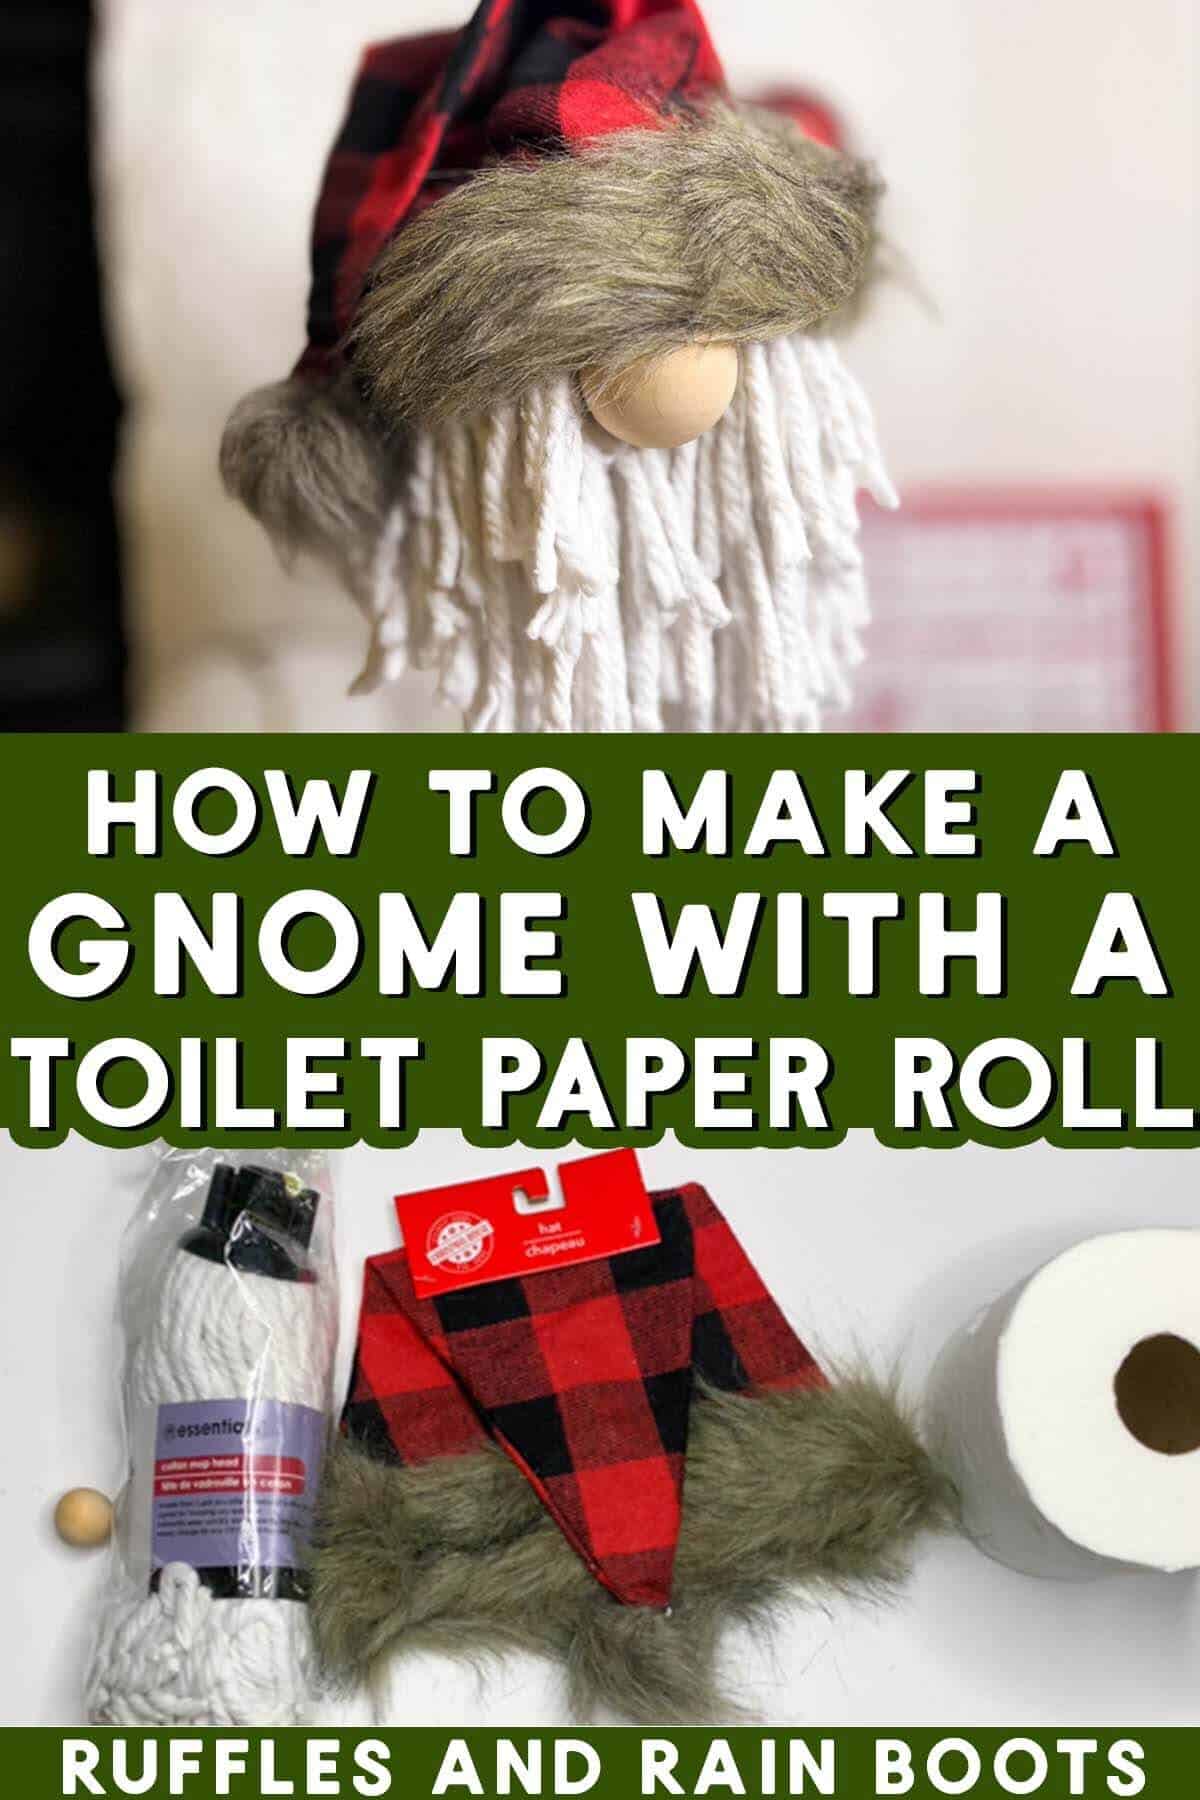 Vertical split image of Christmas gnome with text which reads how to make a gnome with a toilet paper roll.